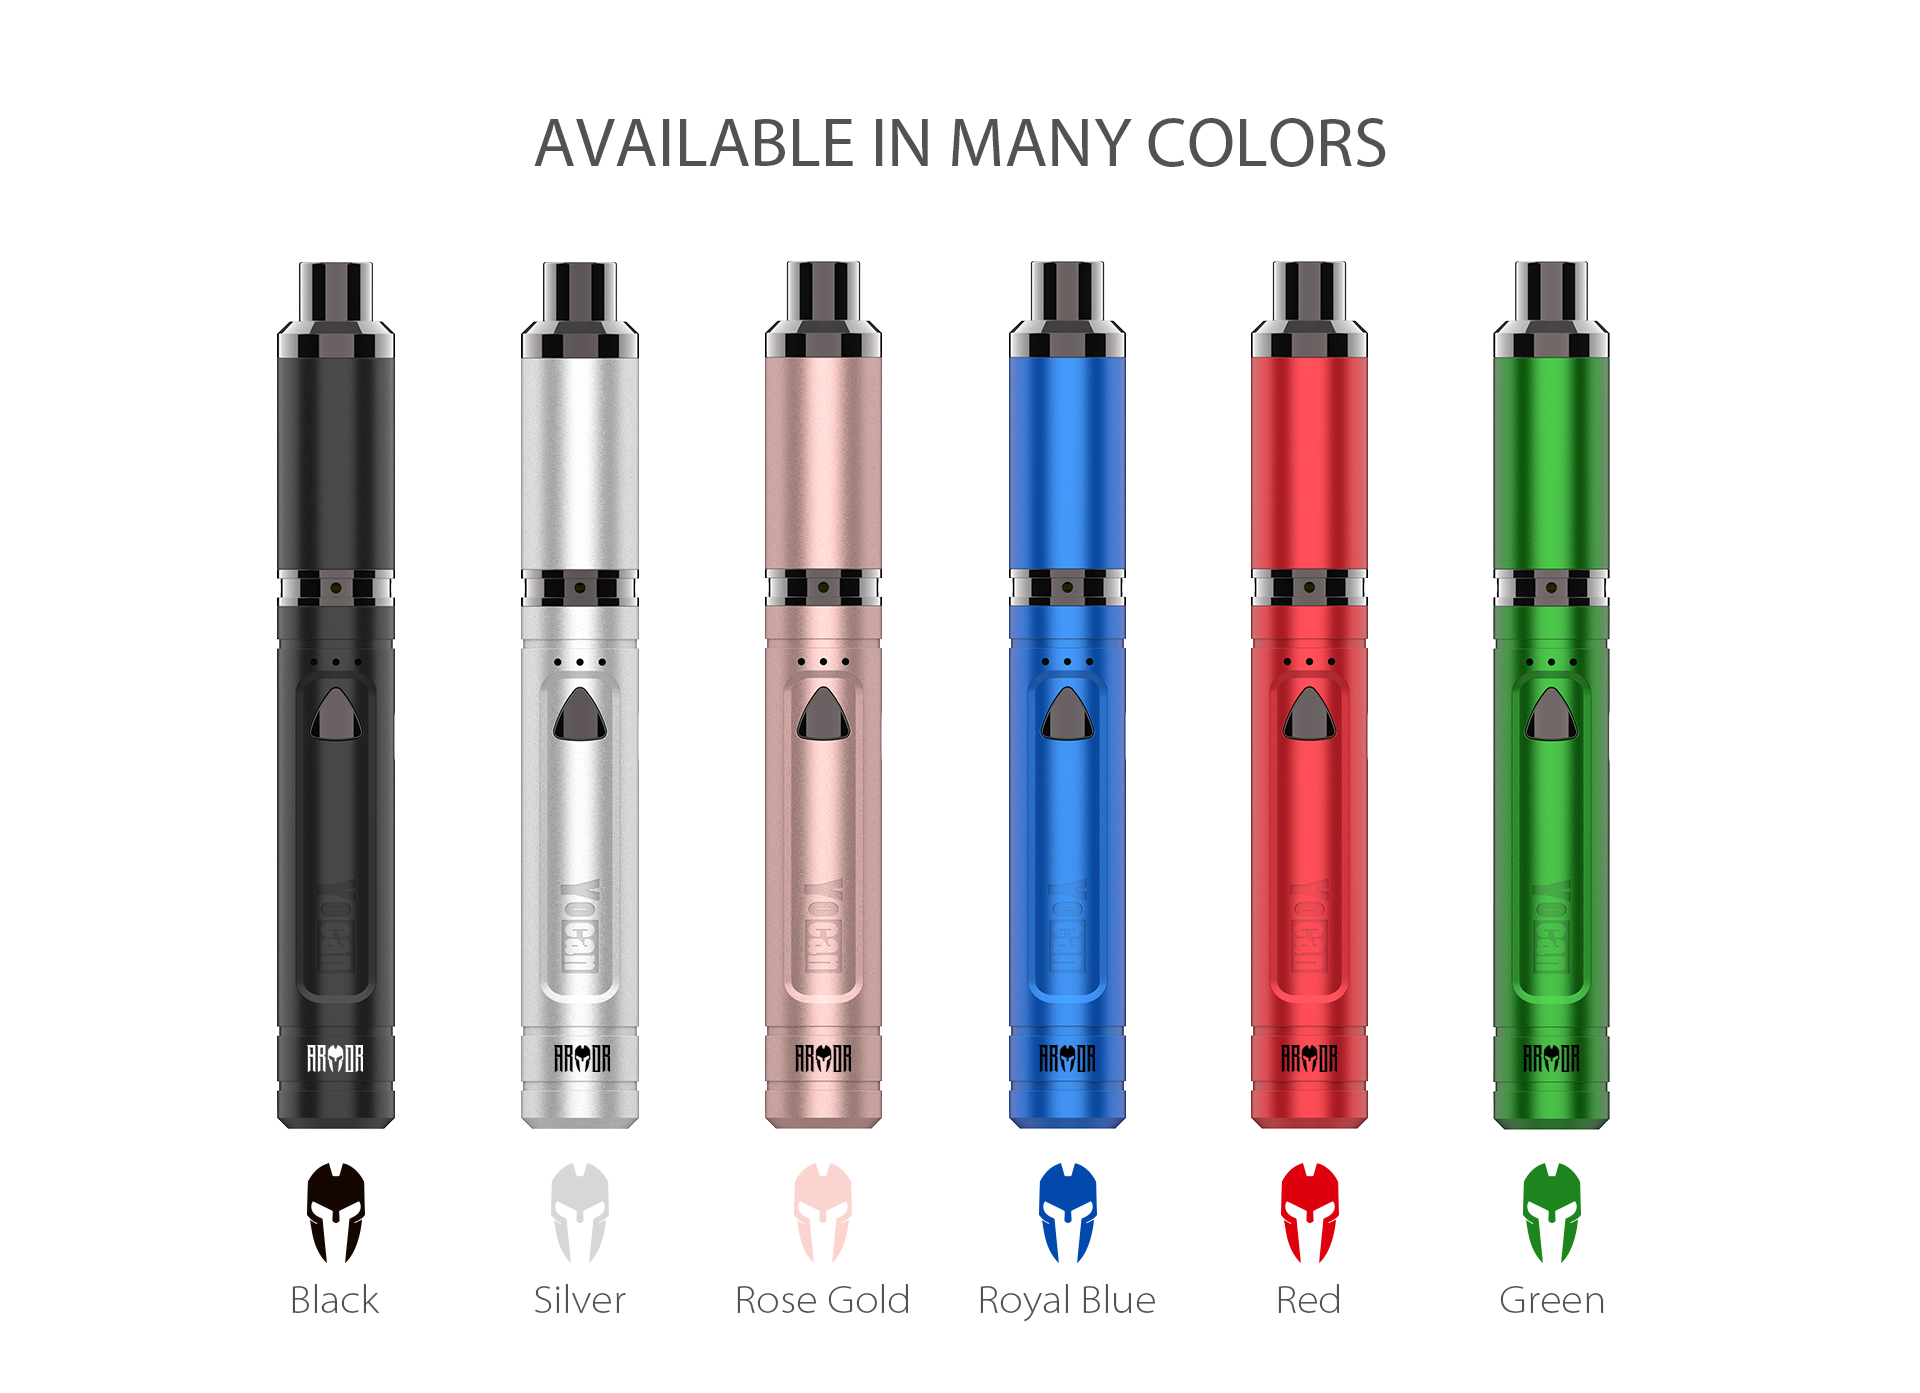 Yocan Armor Plus vape pen available in 6 stylish colors.